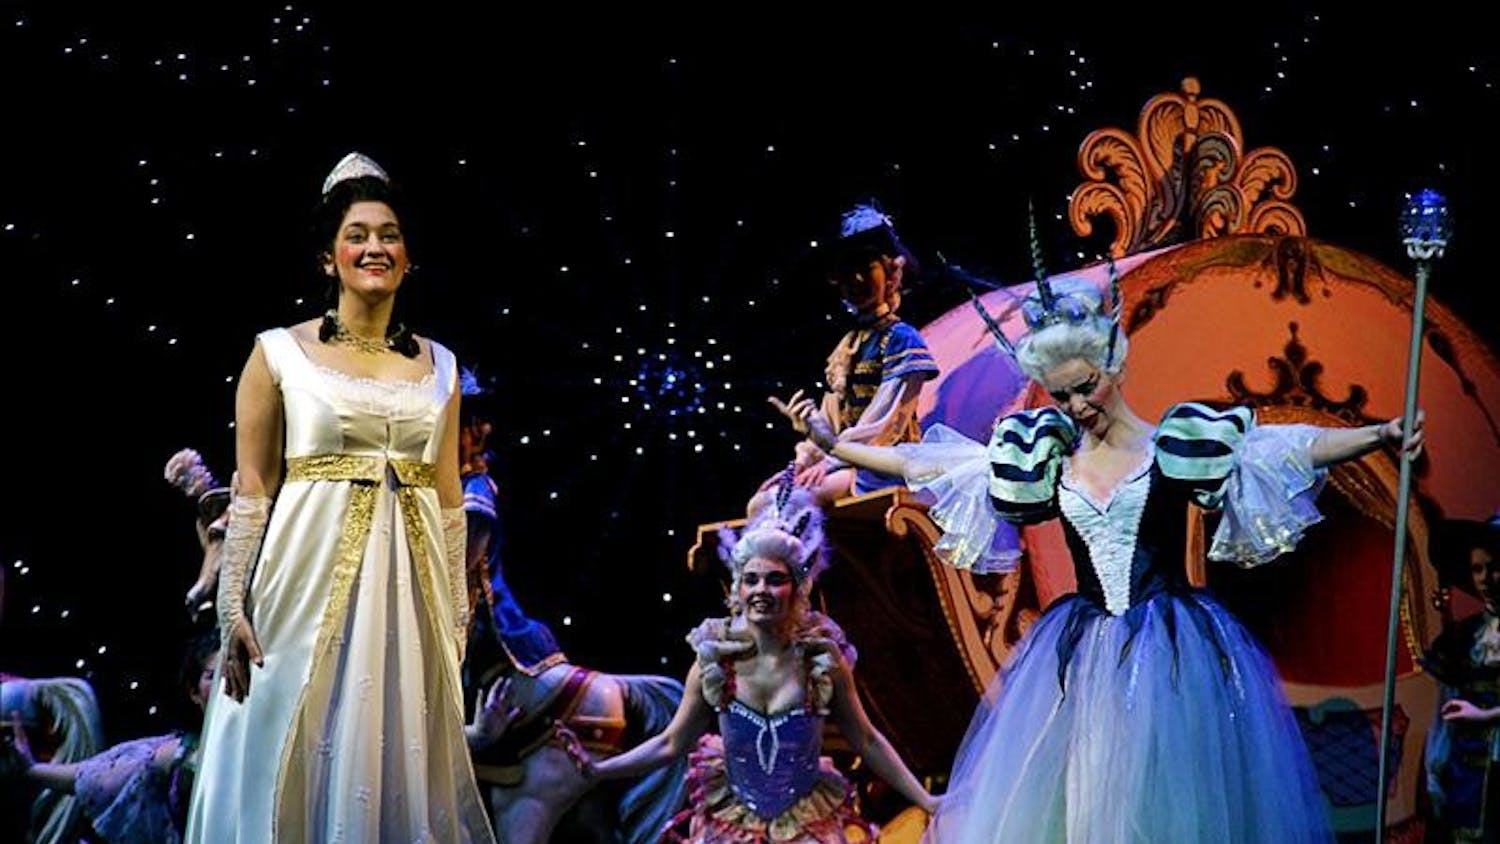 Graduate student Carolina Castells, as Cinderella, prepares to leave for the ball Tuesday evening in the Musical Arts Center. "Cendrillon" will perform Feb. 6, 7, 13 and 14 at 8 p.m..